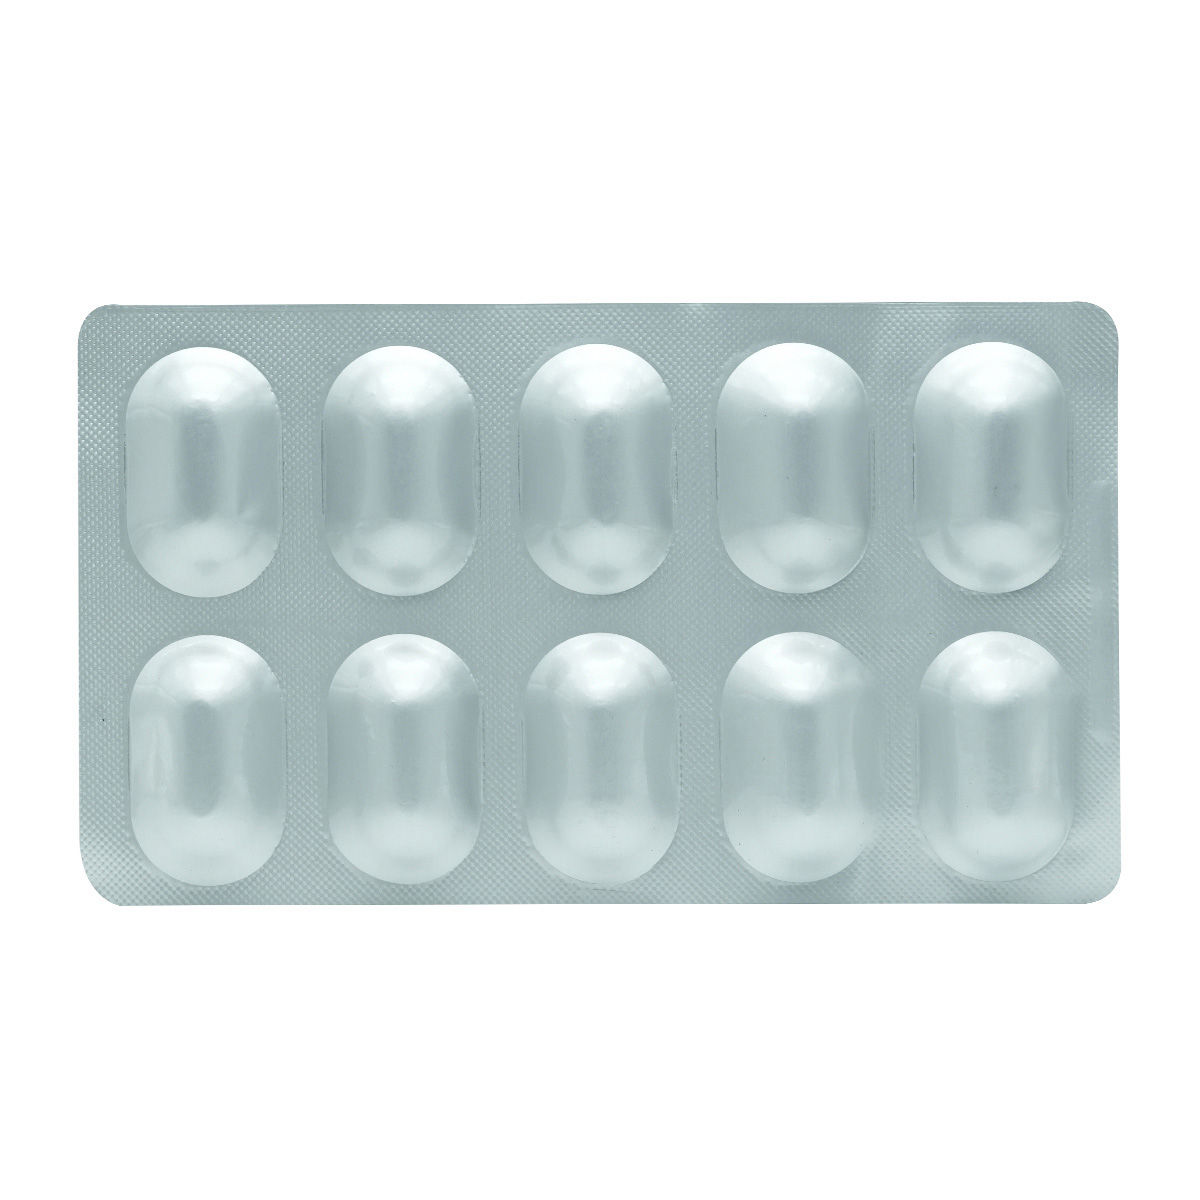 Hairbless Strip Of 10 Tablets: Uses, Side Effects, Price & Dosage |  PharmEasy